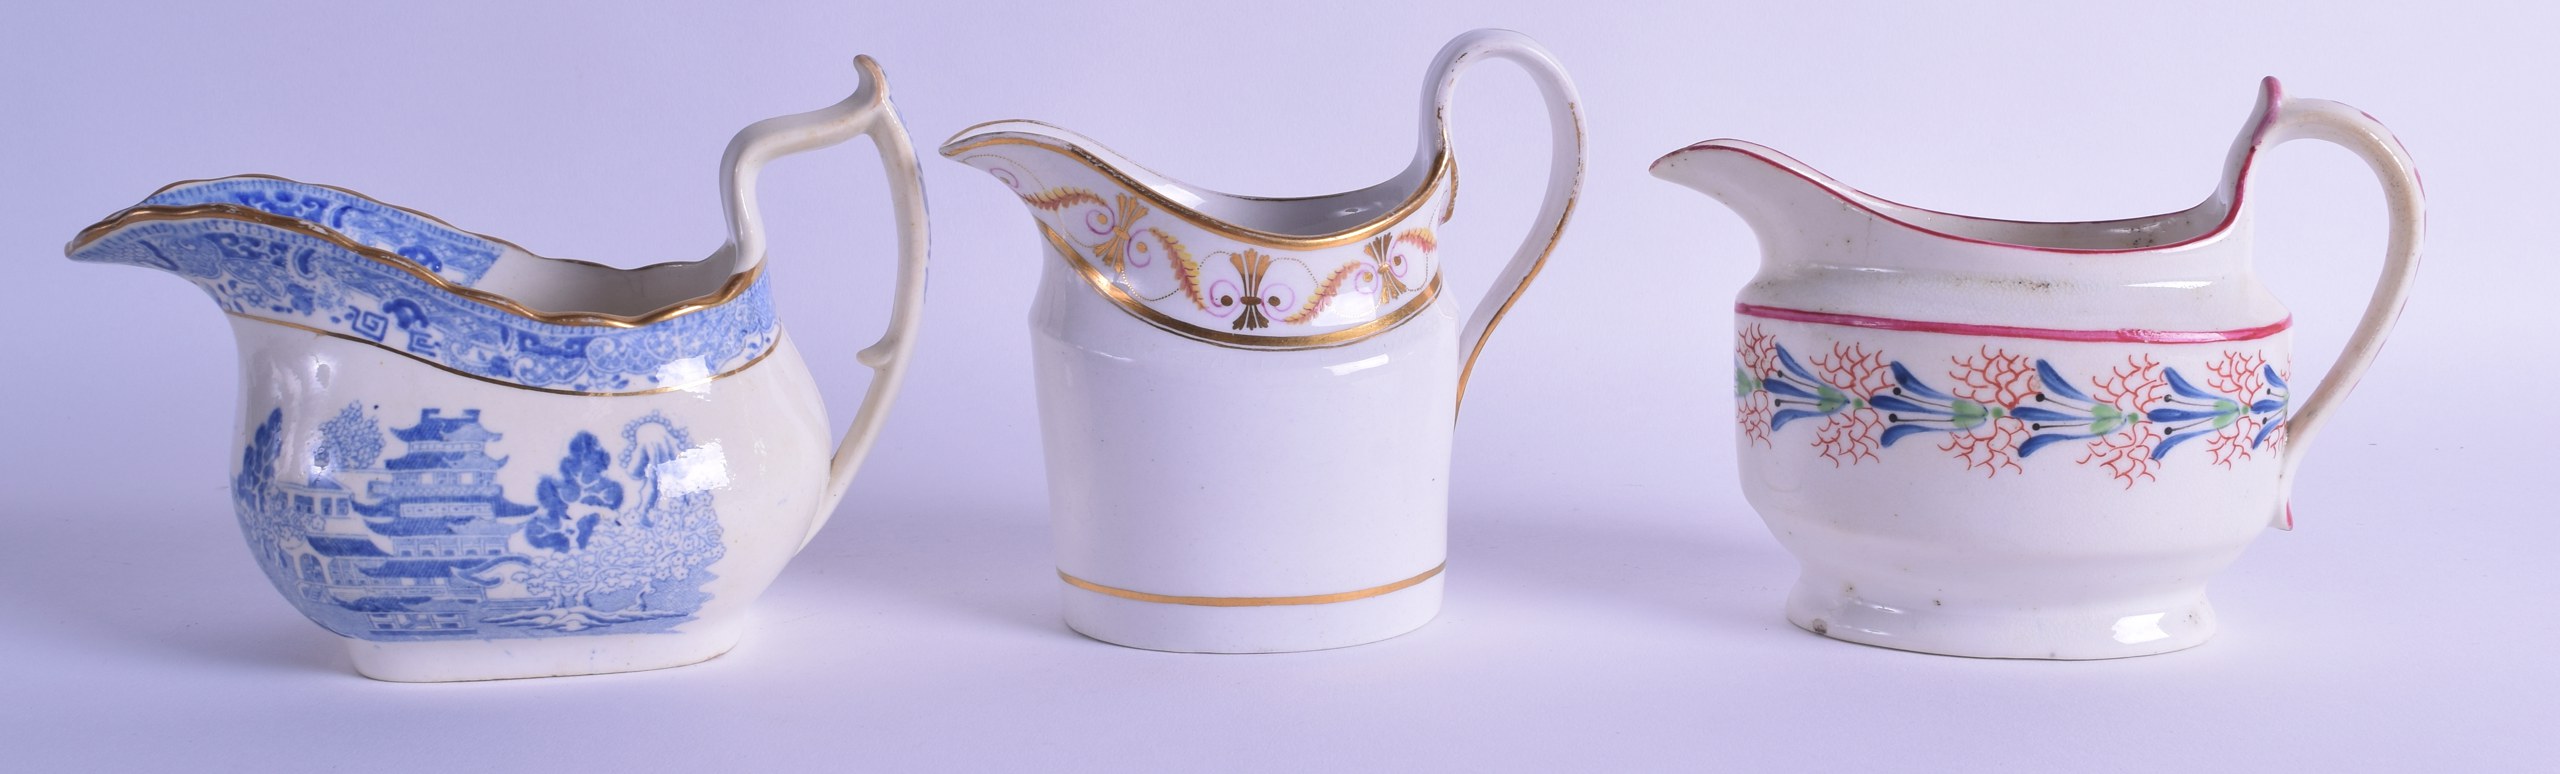 Early 19th c. English cream jug pattern of tall oval form pattern N45 another cream jug with a